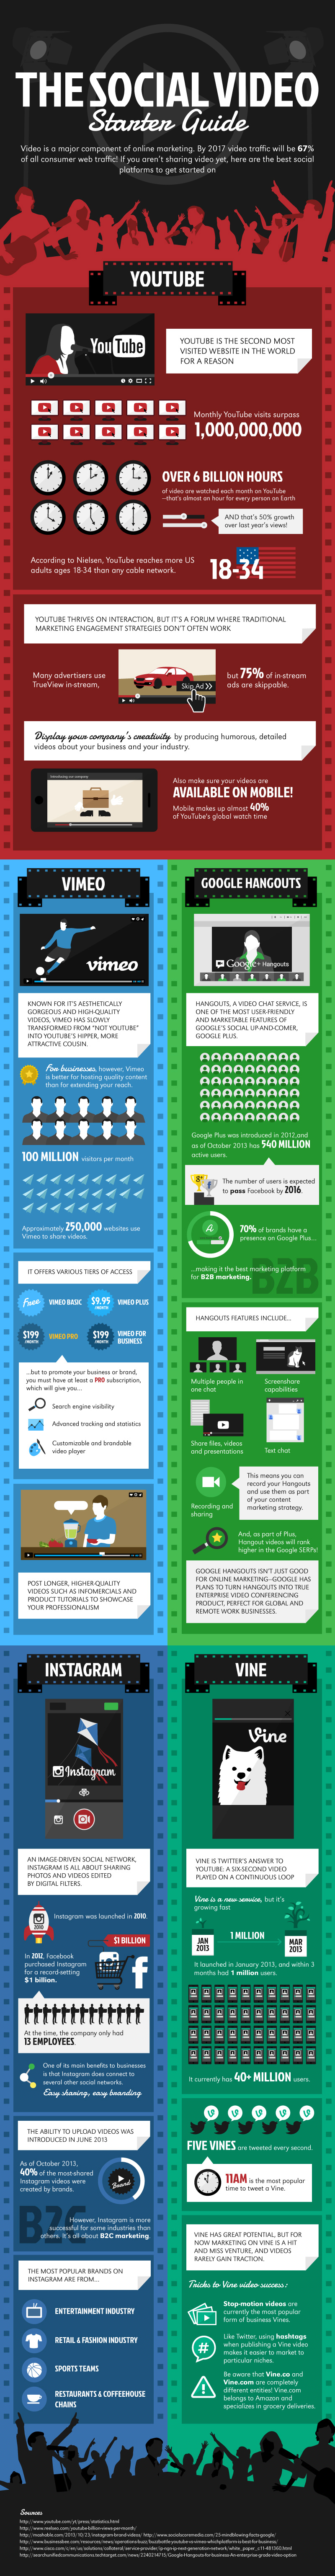 The Ultimate Social Video Starter Guide [Infographic]